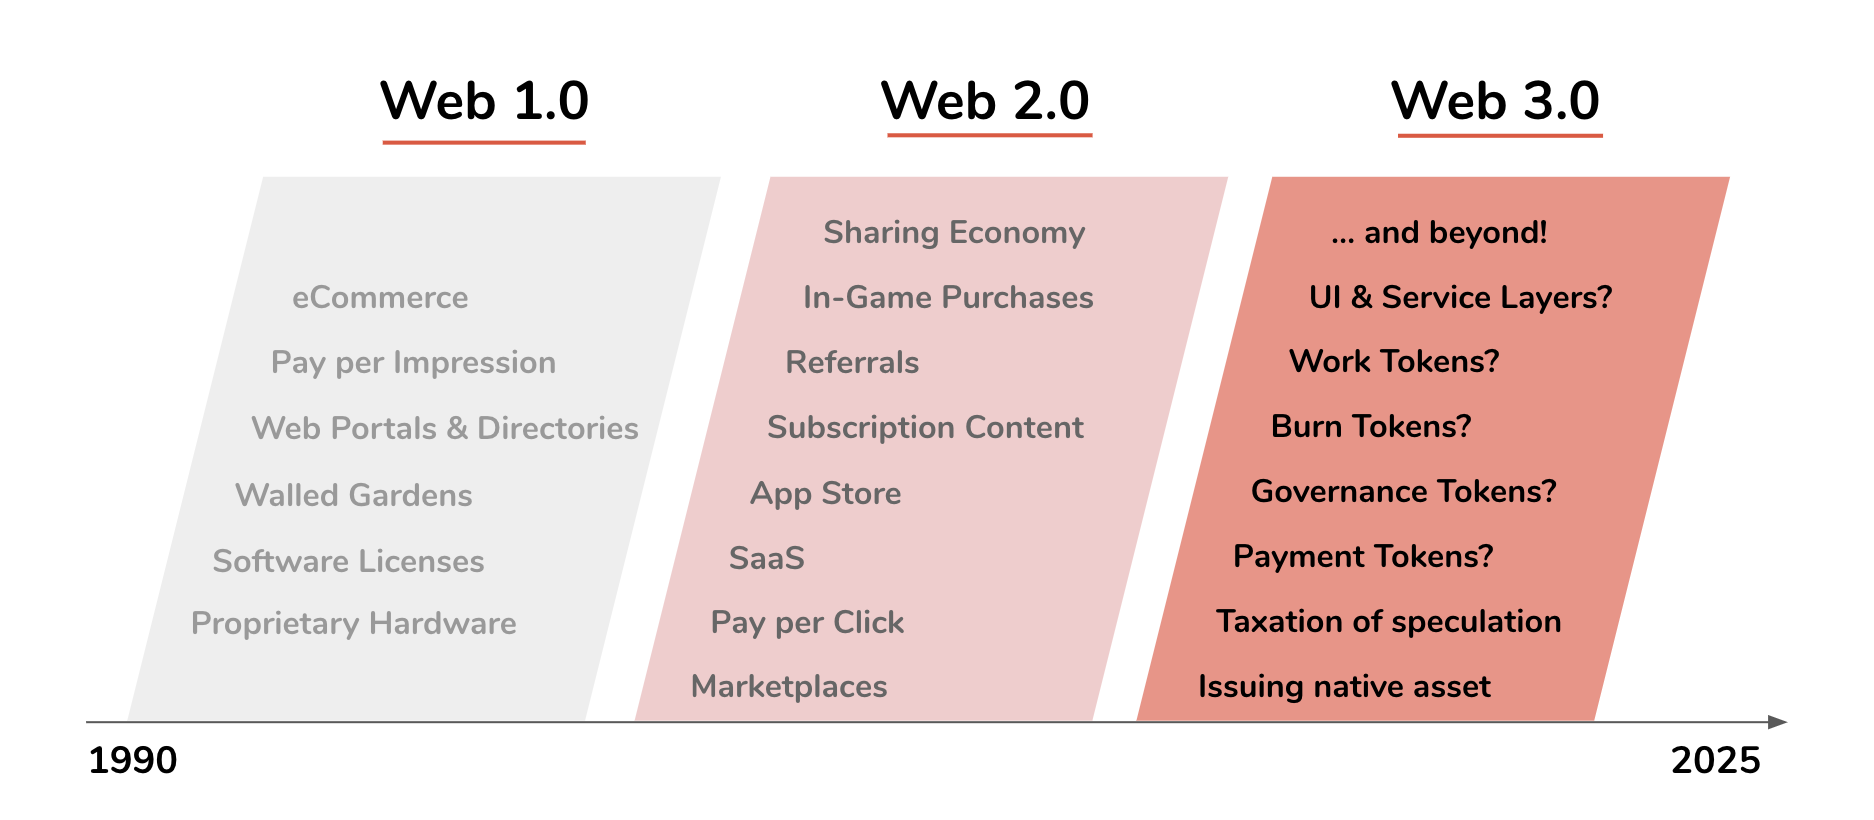 What is Web 1.0 examples today?